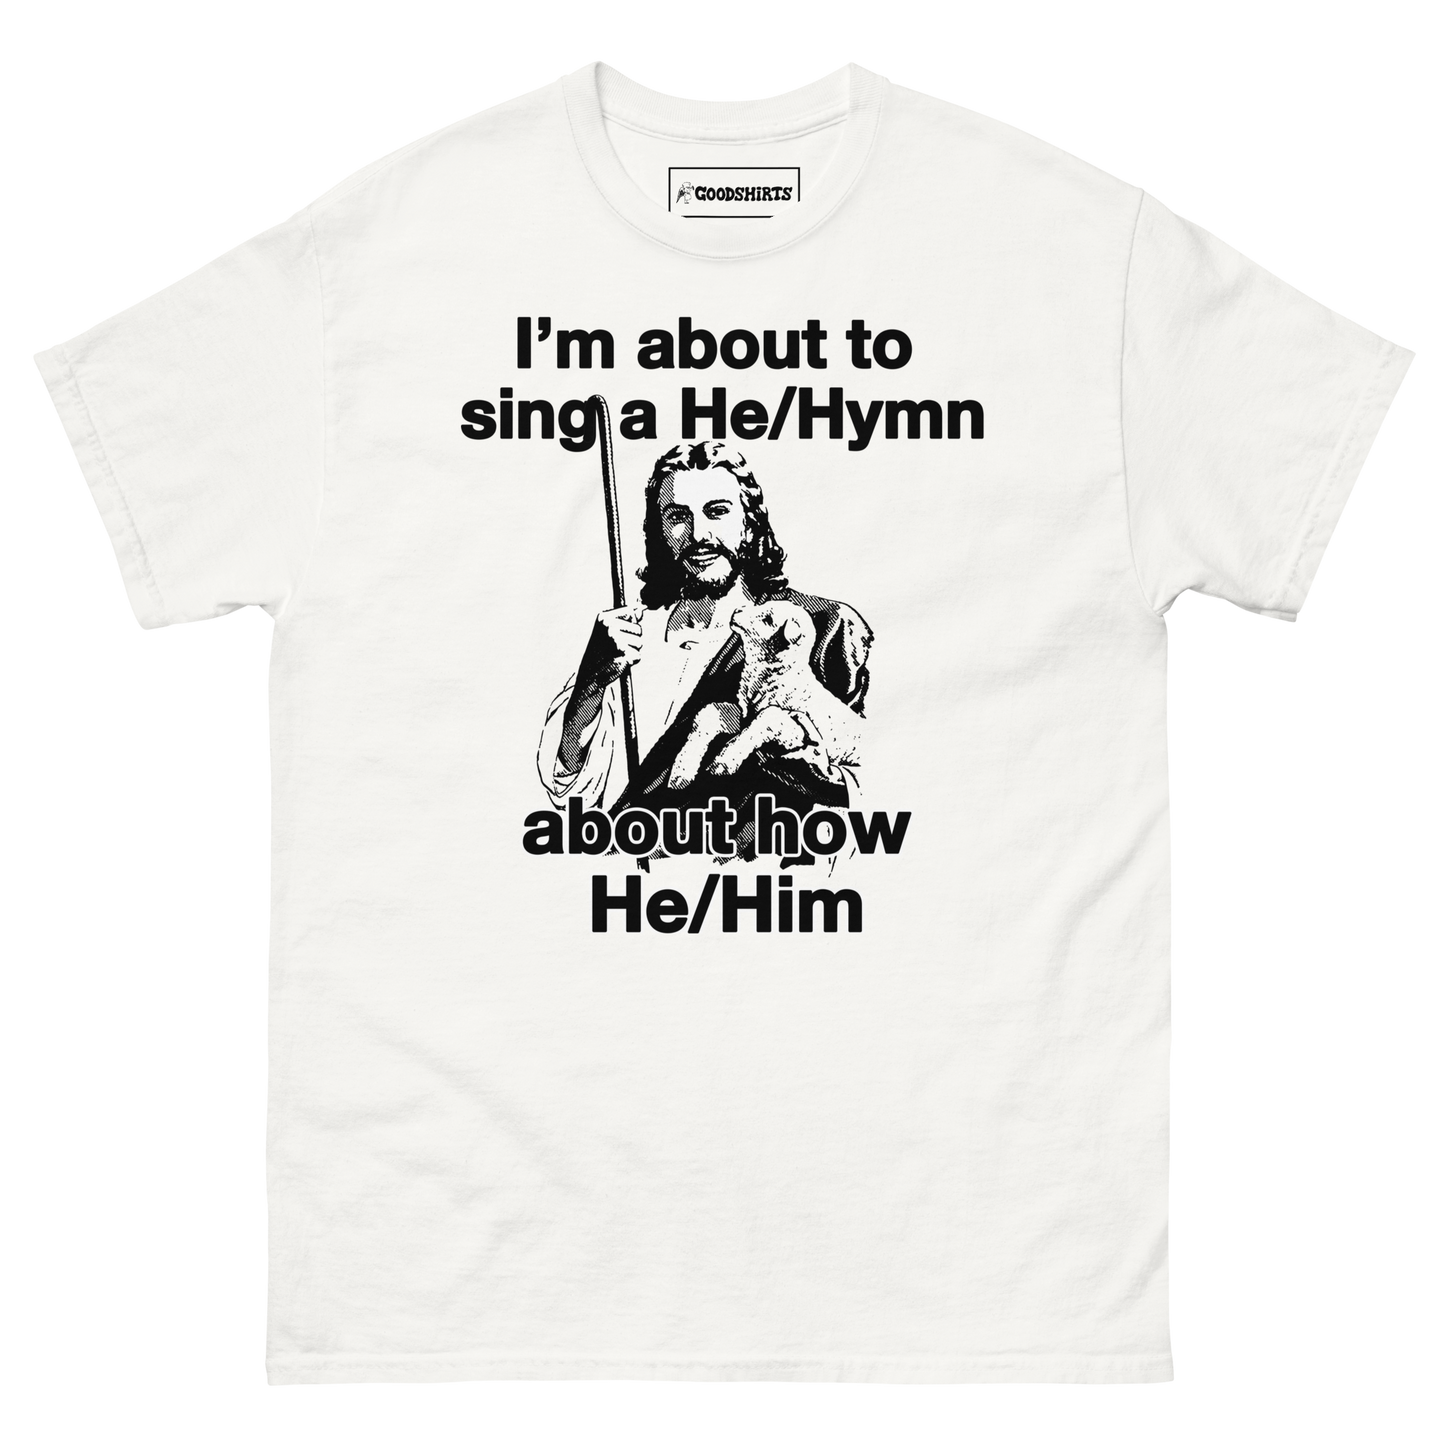 I'm About to Sing a He/Hymn About How He/Him.